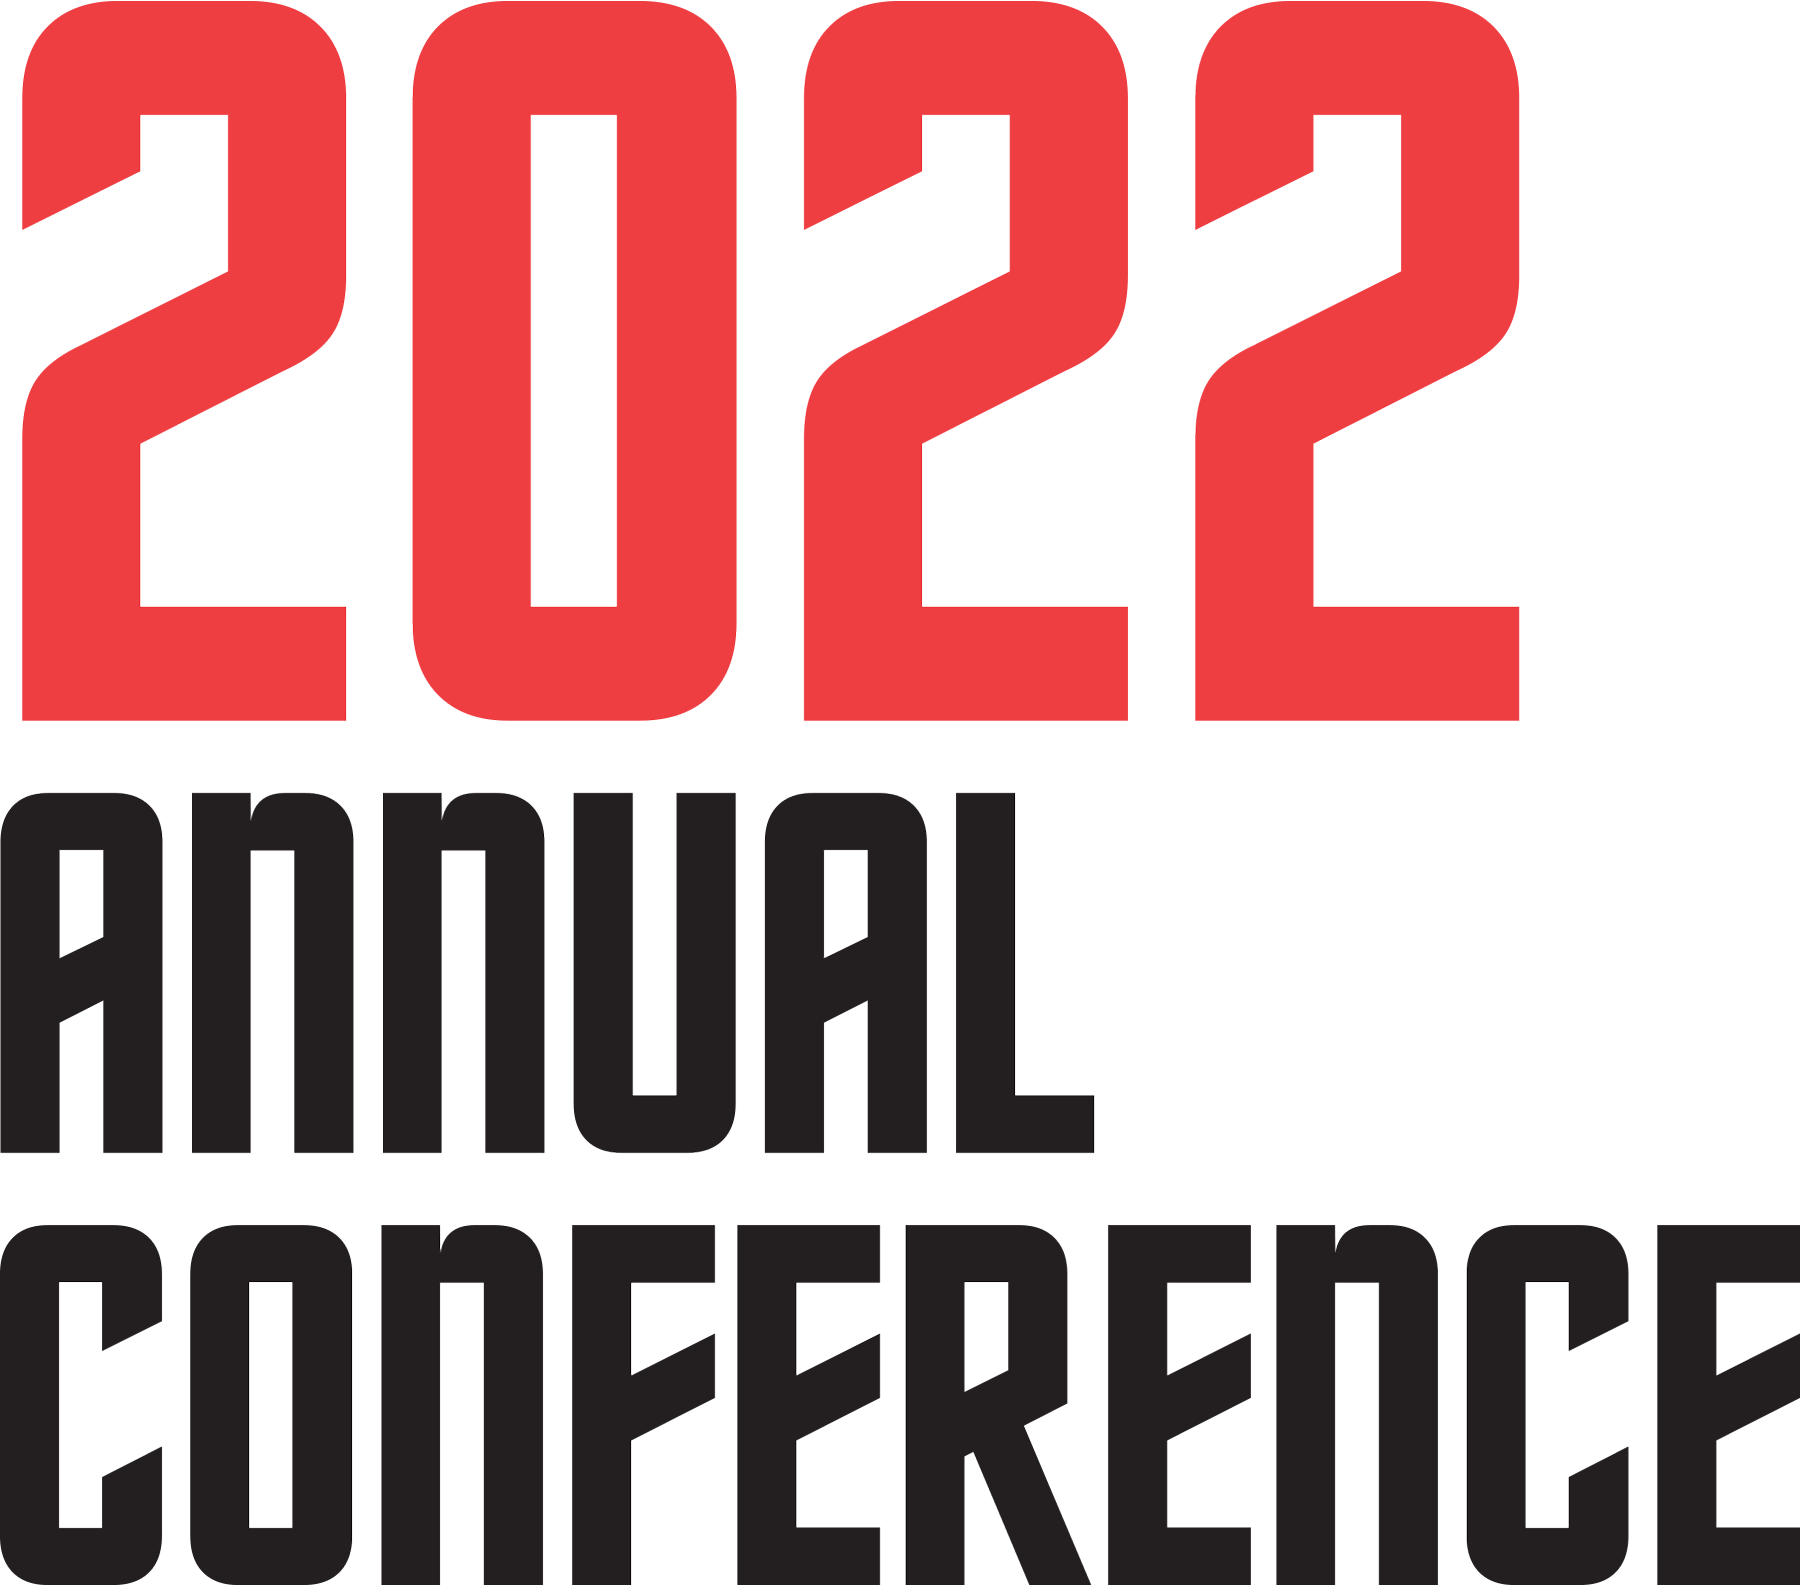 2022 Annual Conference title